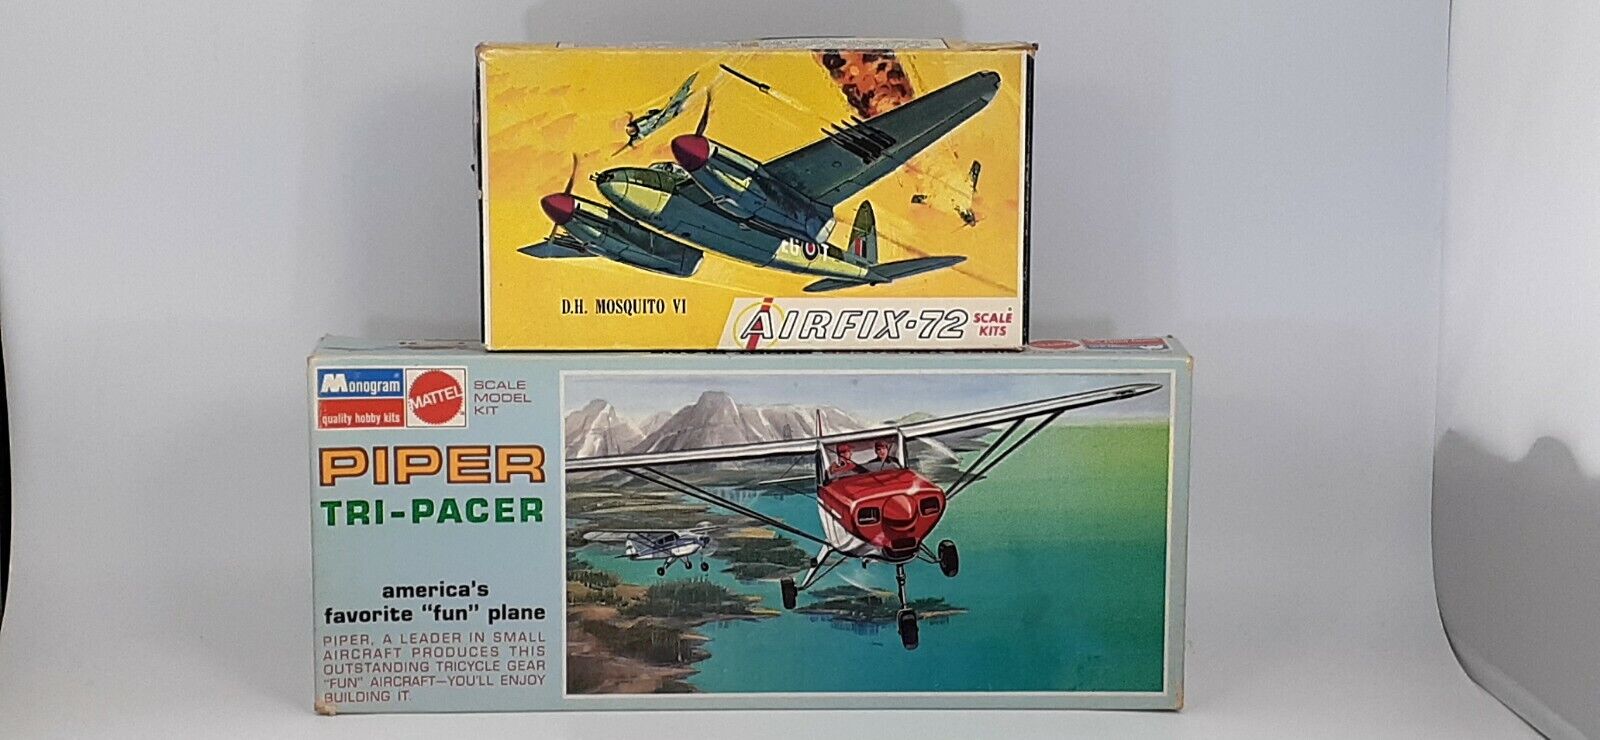 Lot Of 2 Aircraft Model Kit  D.H MOSQUITO VI AND PIPER TRI-PACER